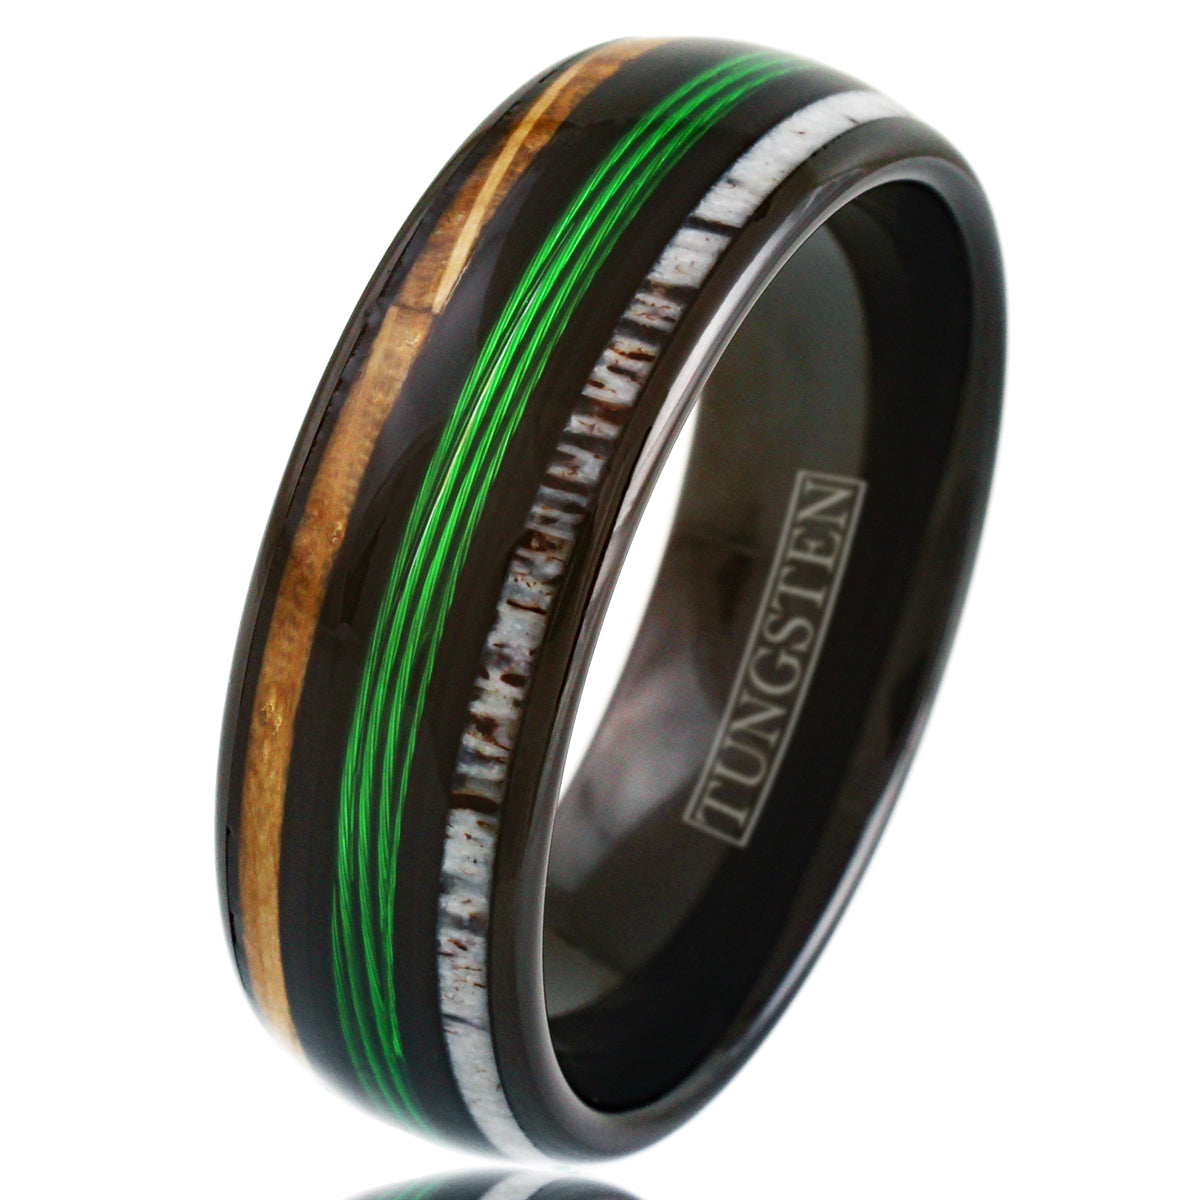 Stunning Polished Black Tungsten Low Dome Ring with Glorious Green Real Fishing Line Between Whiskey Barrel Oak Wood and Deer Antler Inlays.